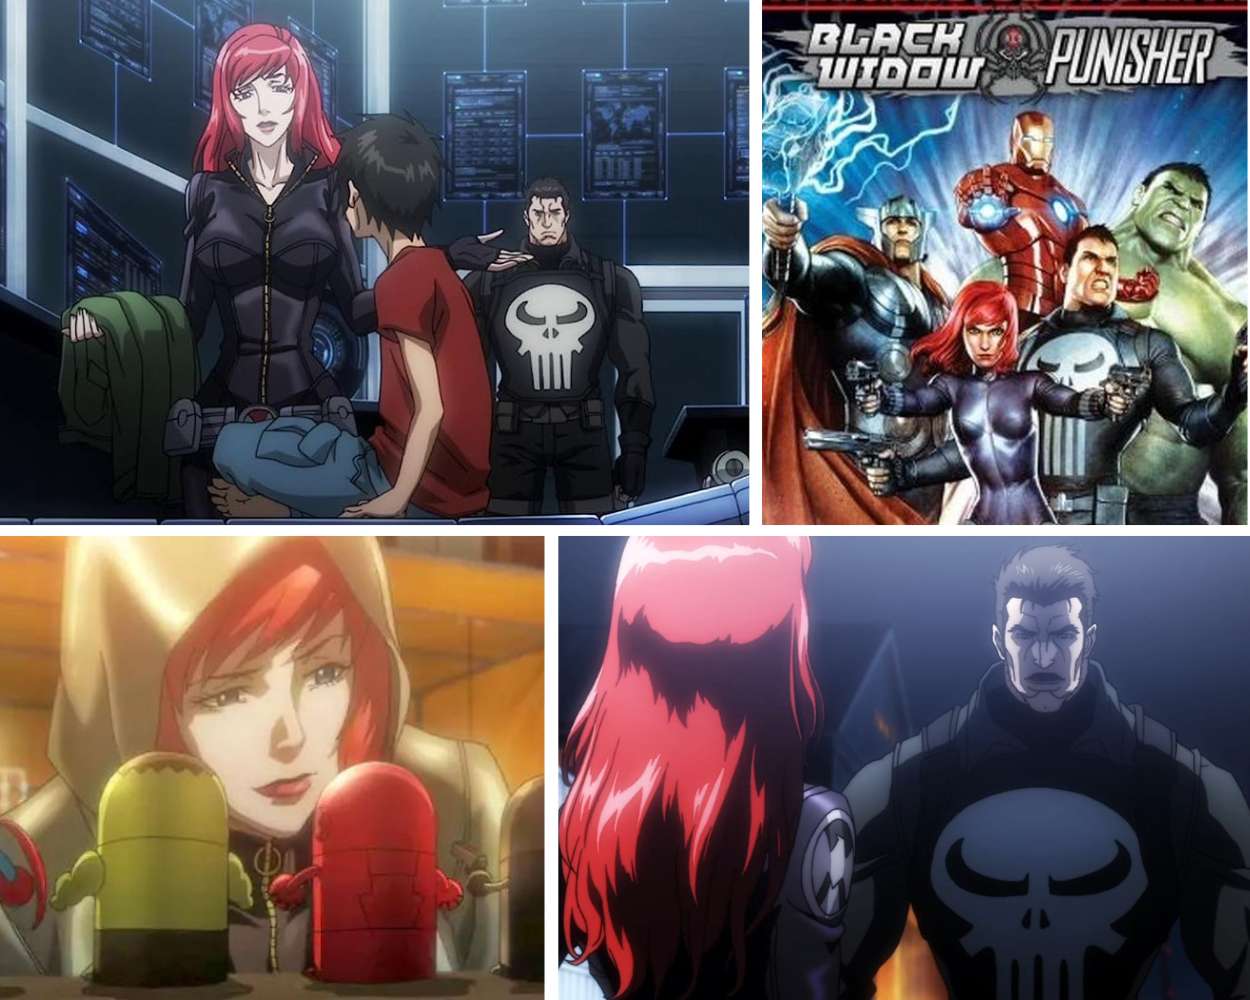 Avengers Confidential Black Widow & Punisher (2014)